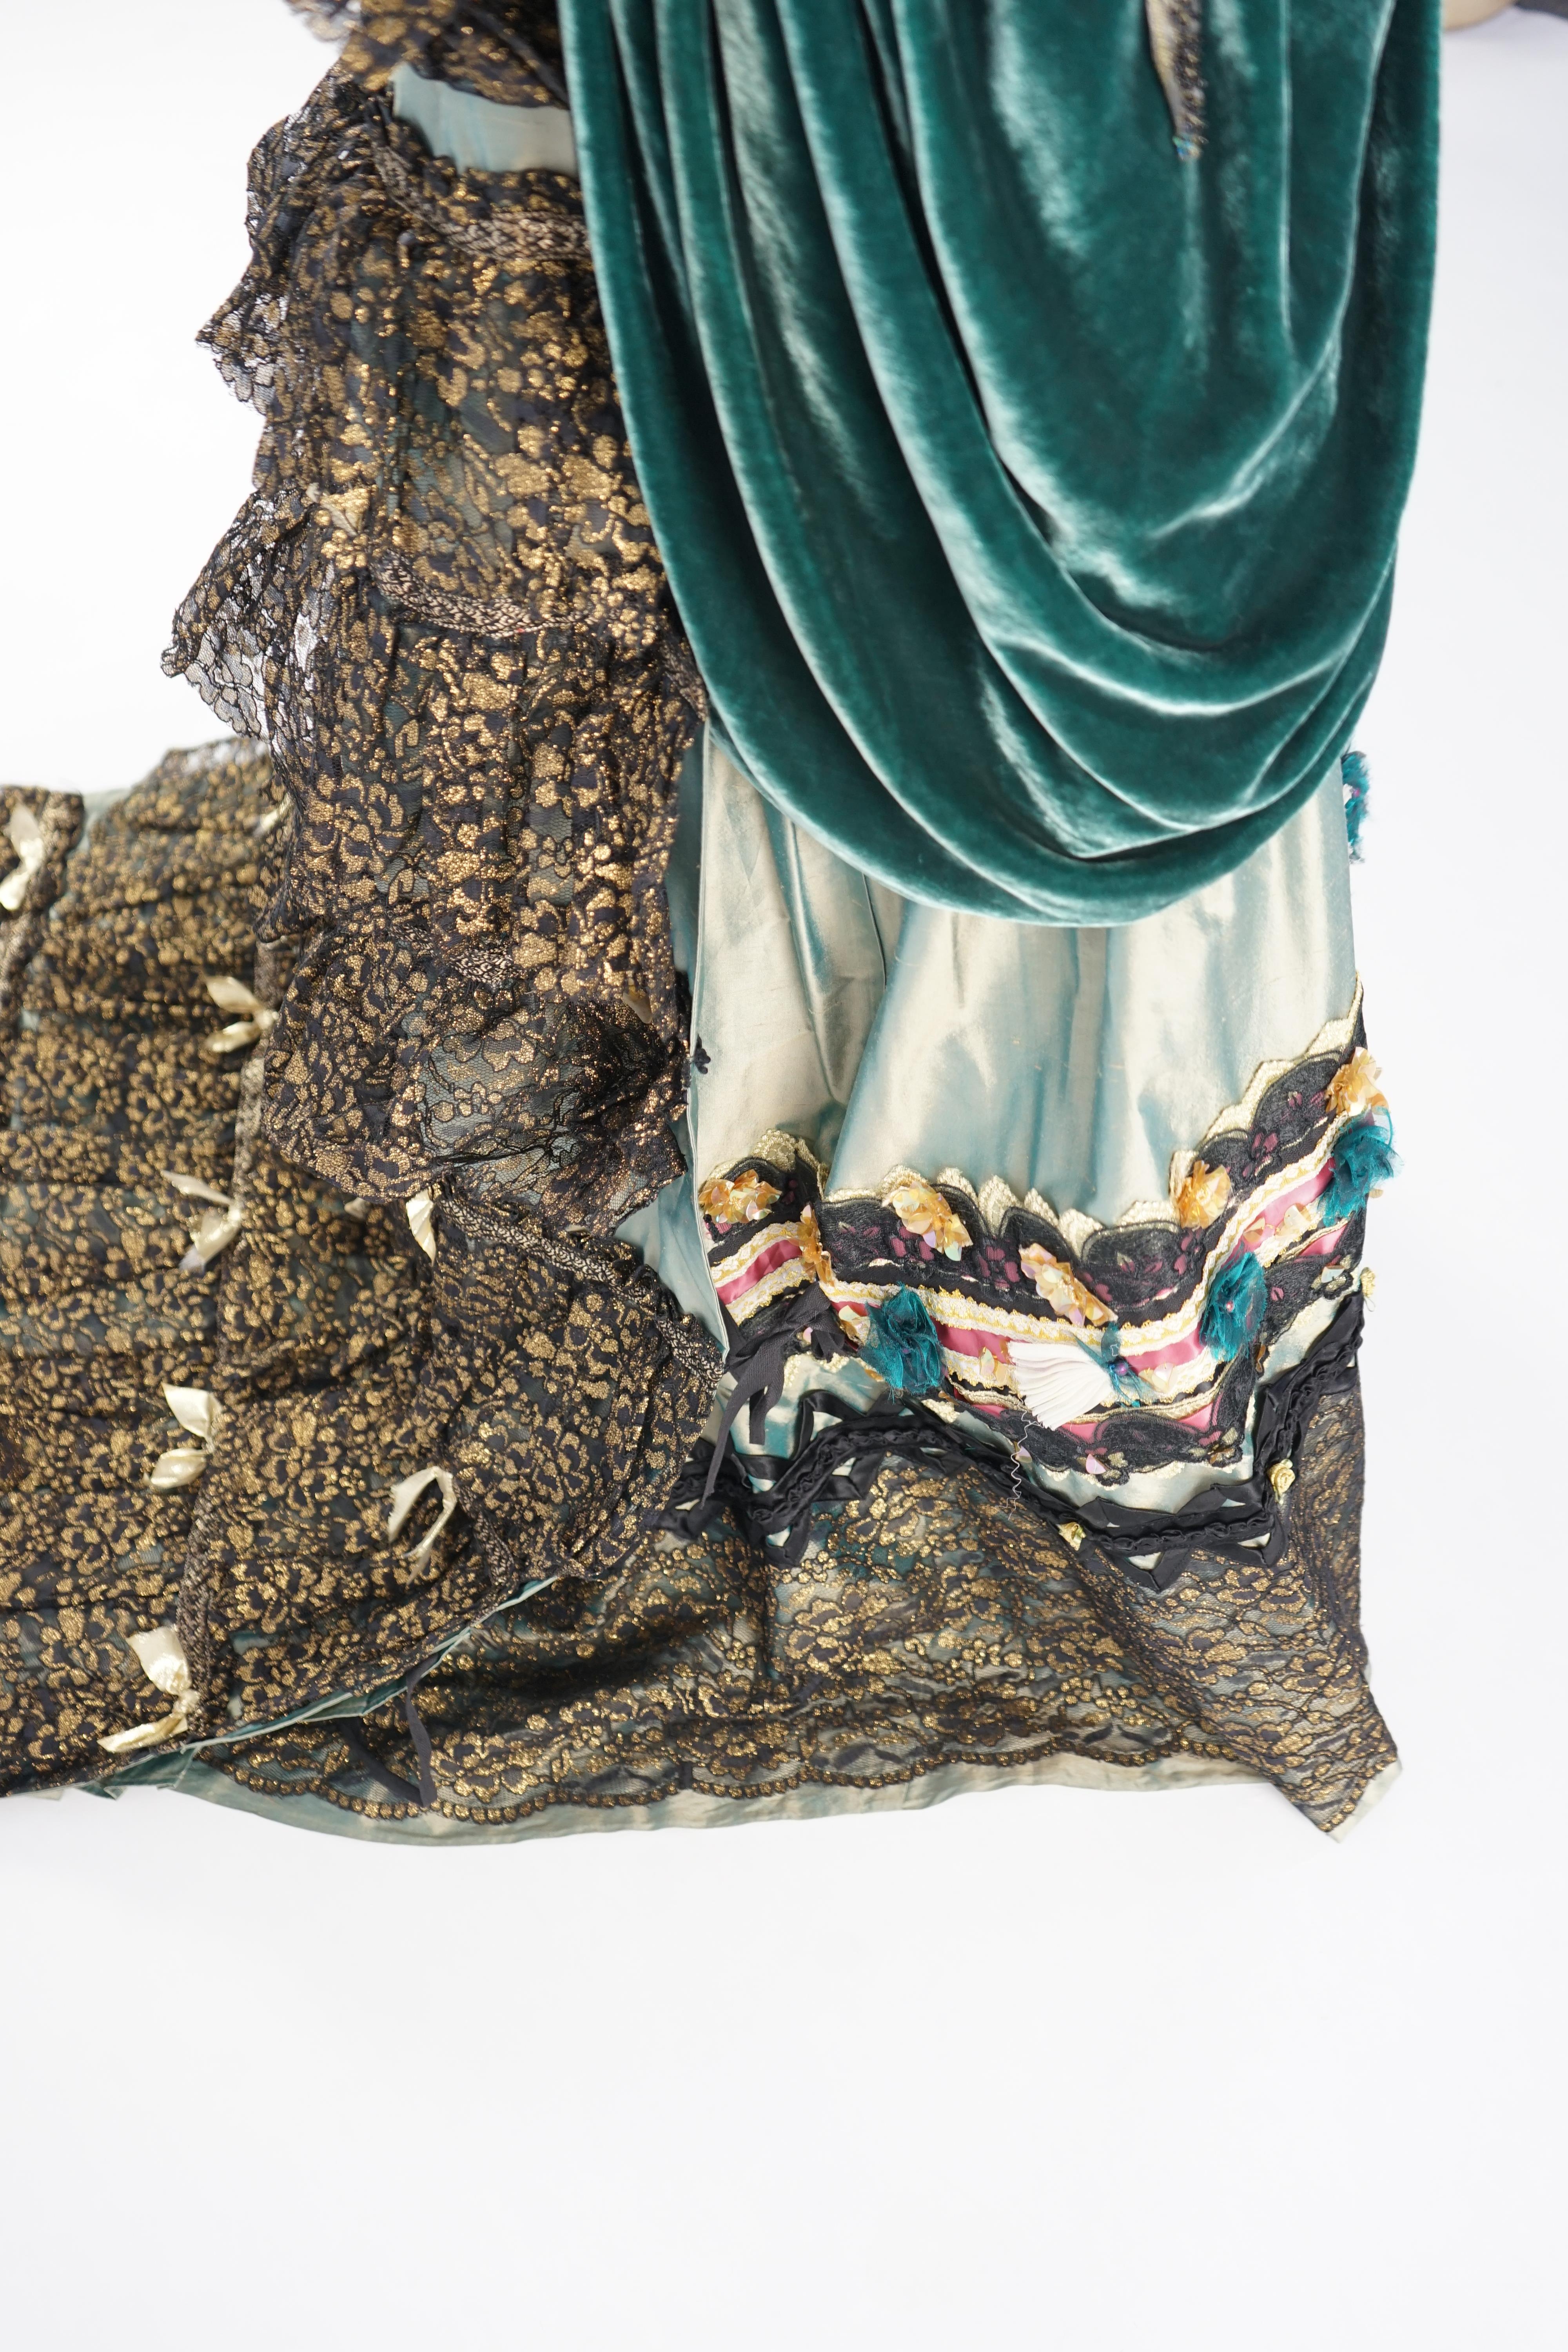 An Edwardian style lady's green taffeta skirt decorated with beaded, sequinned, ribboned border and swags of silk velvet, together with matching train layered with frilled black and gold lace, appliquéd with gold bows